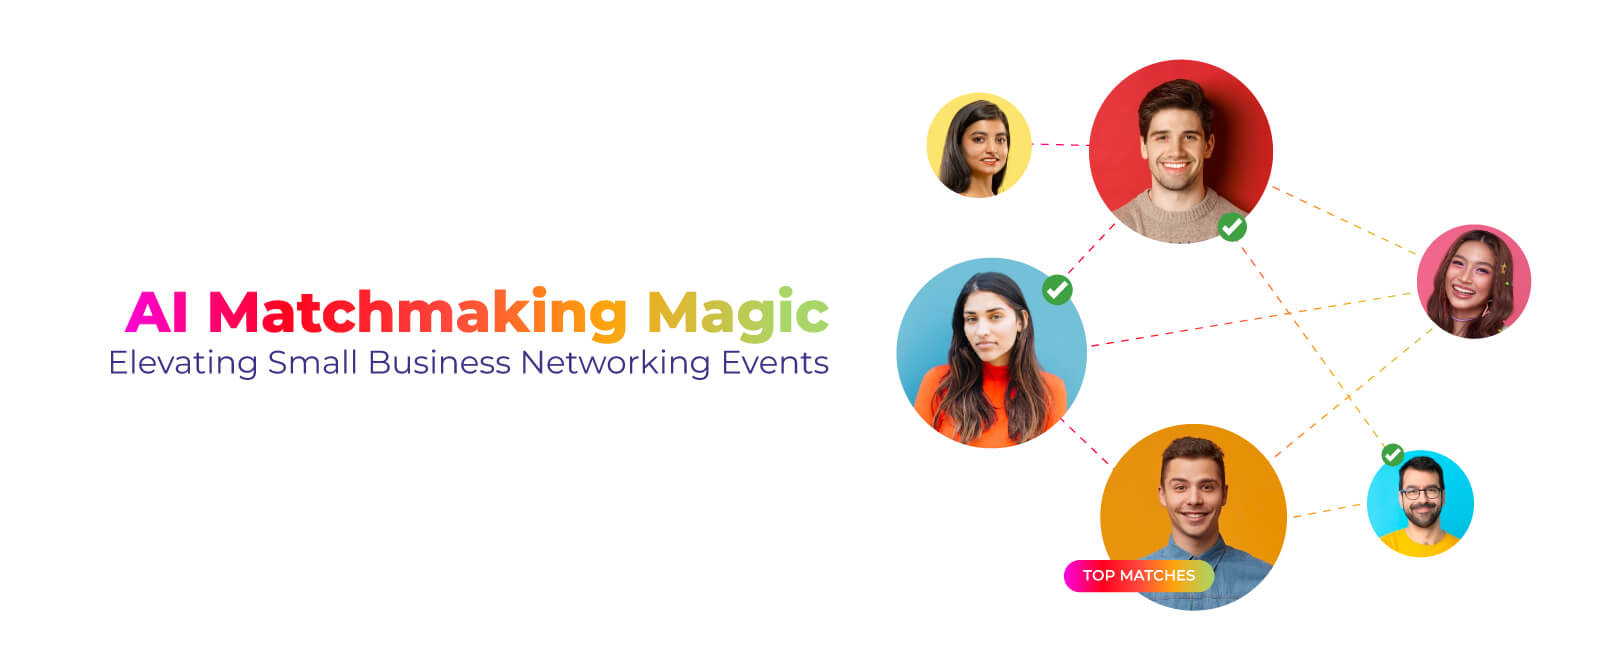 AI Matchmaking Magic: Elevating Small Business Networking Events